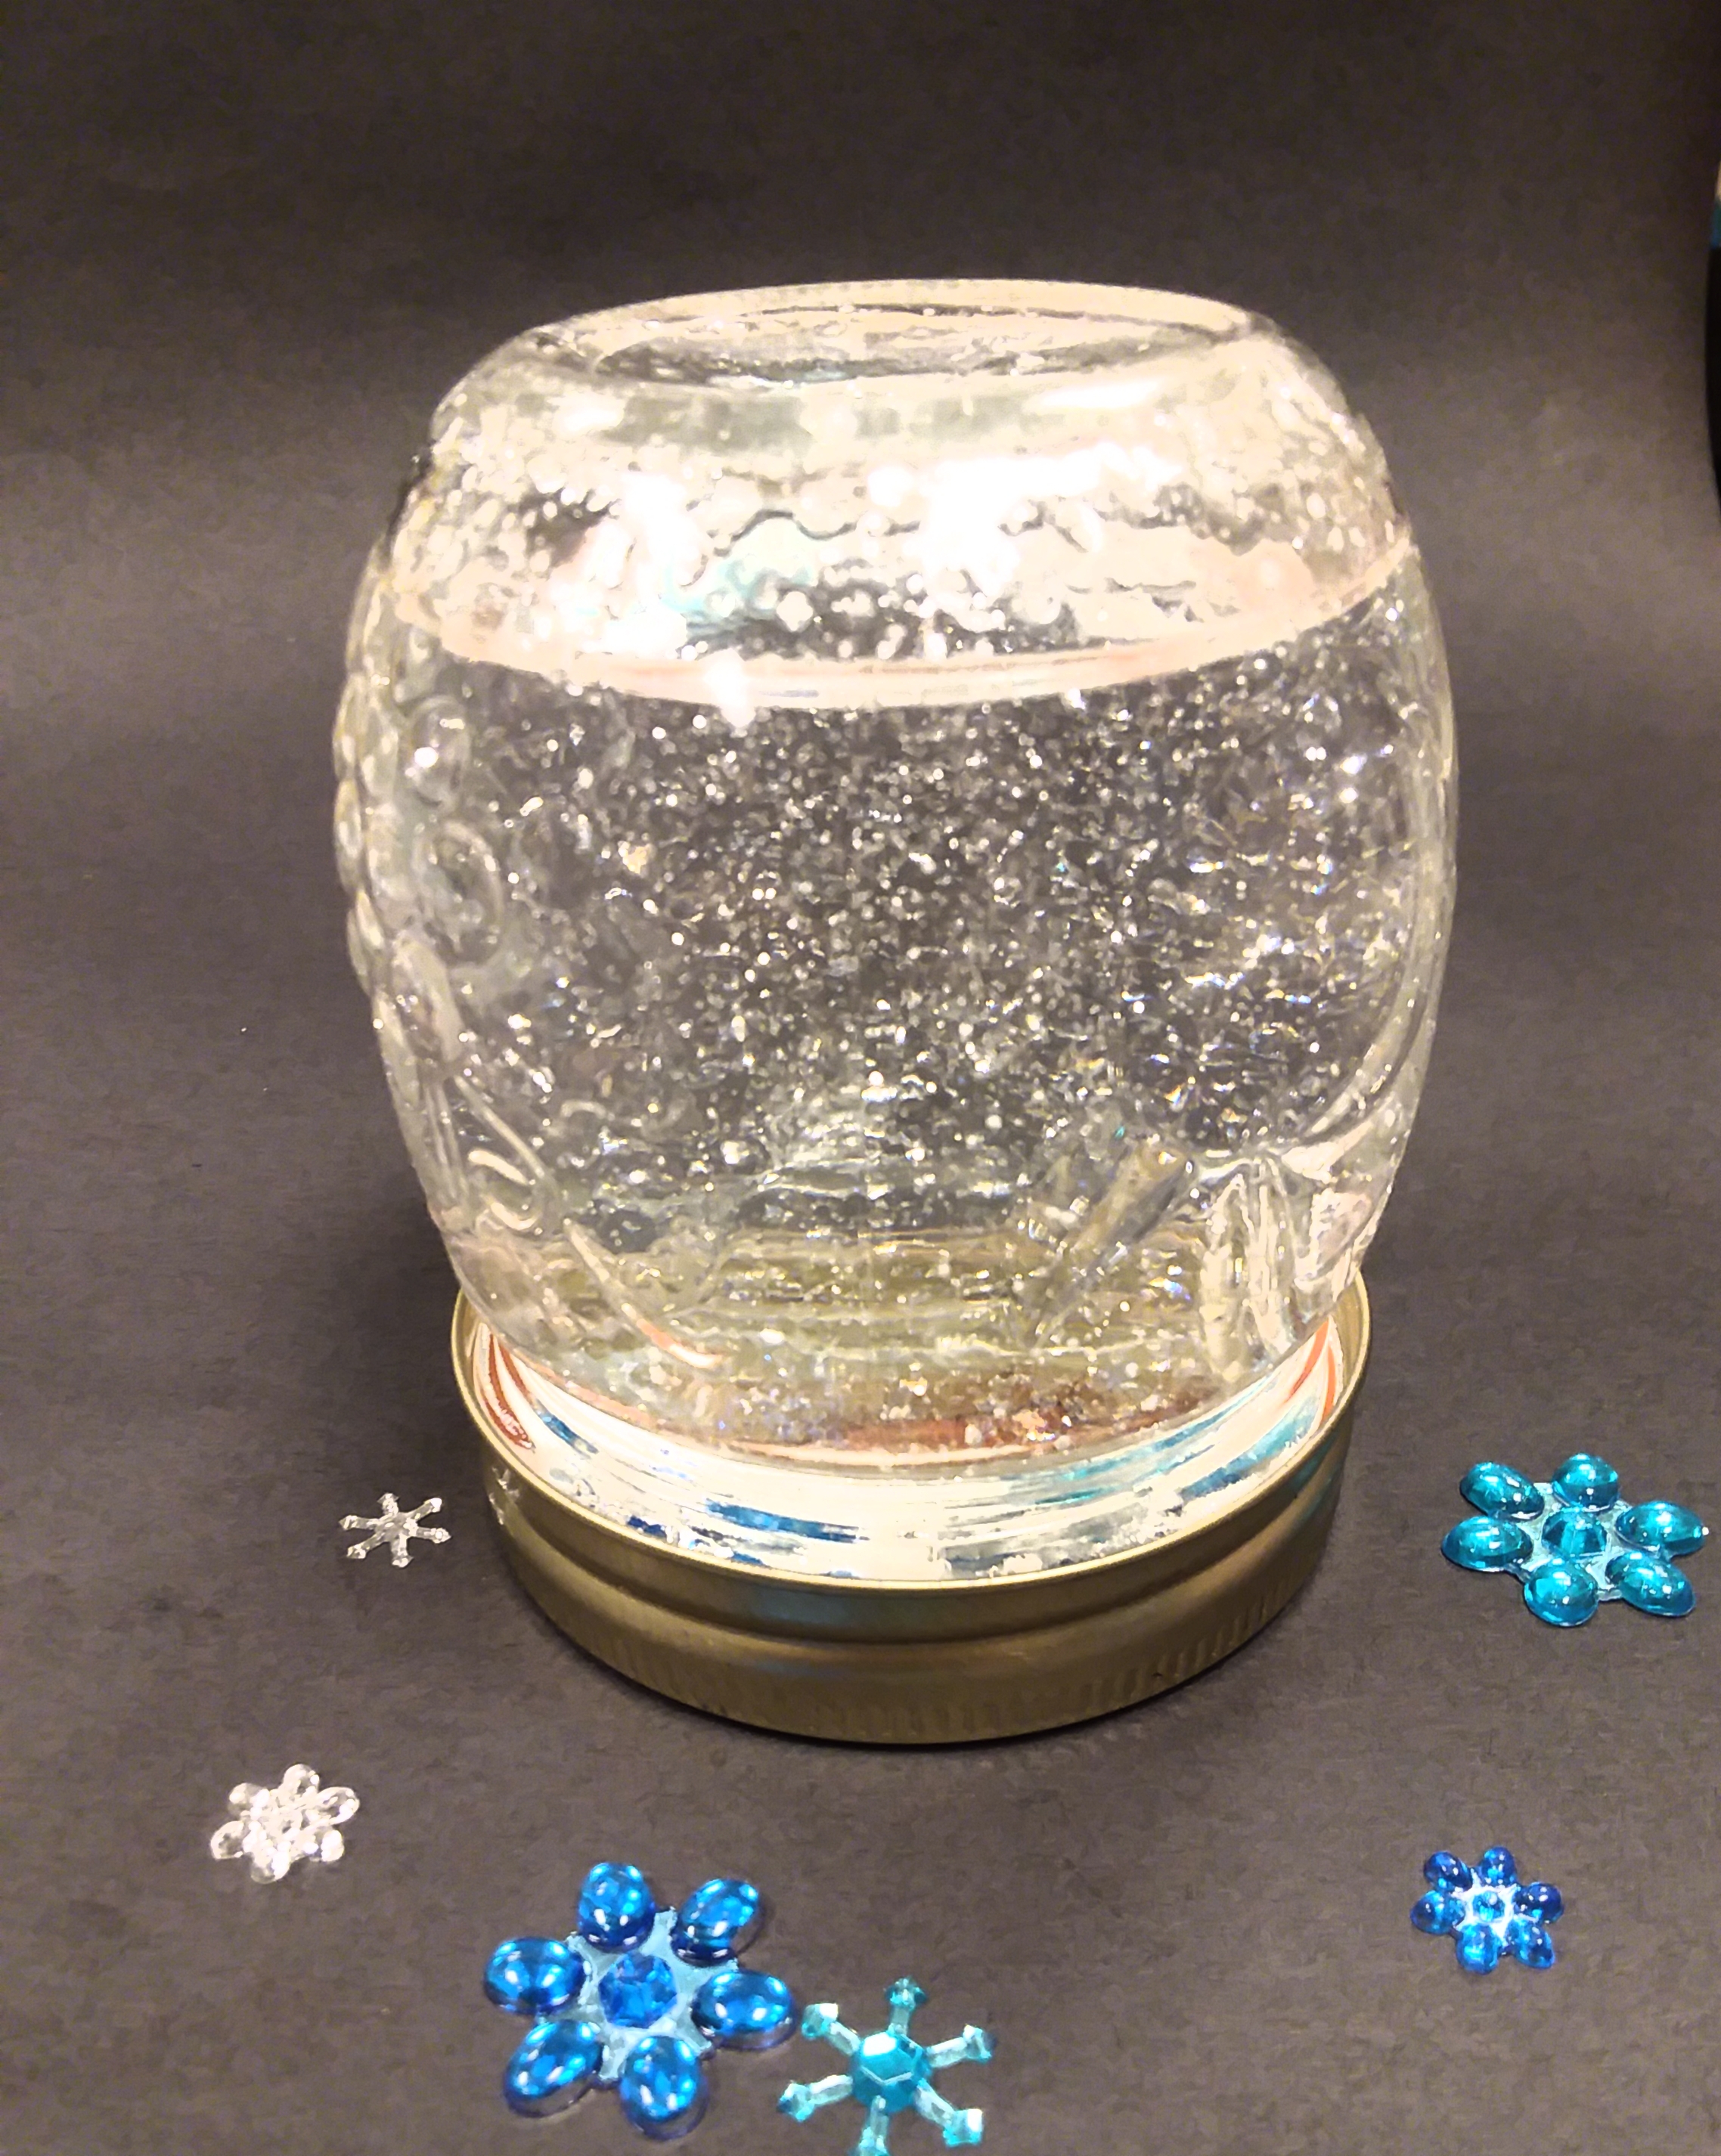 snow globe made from a glass jar